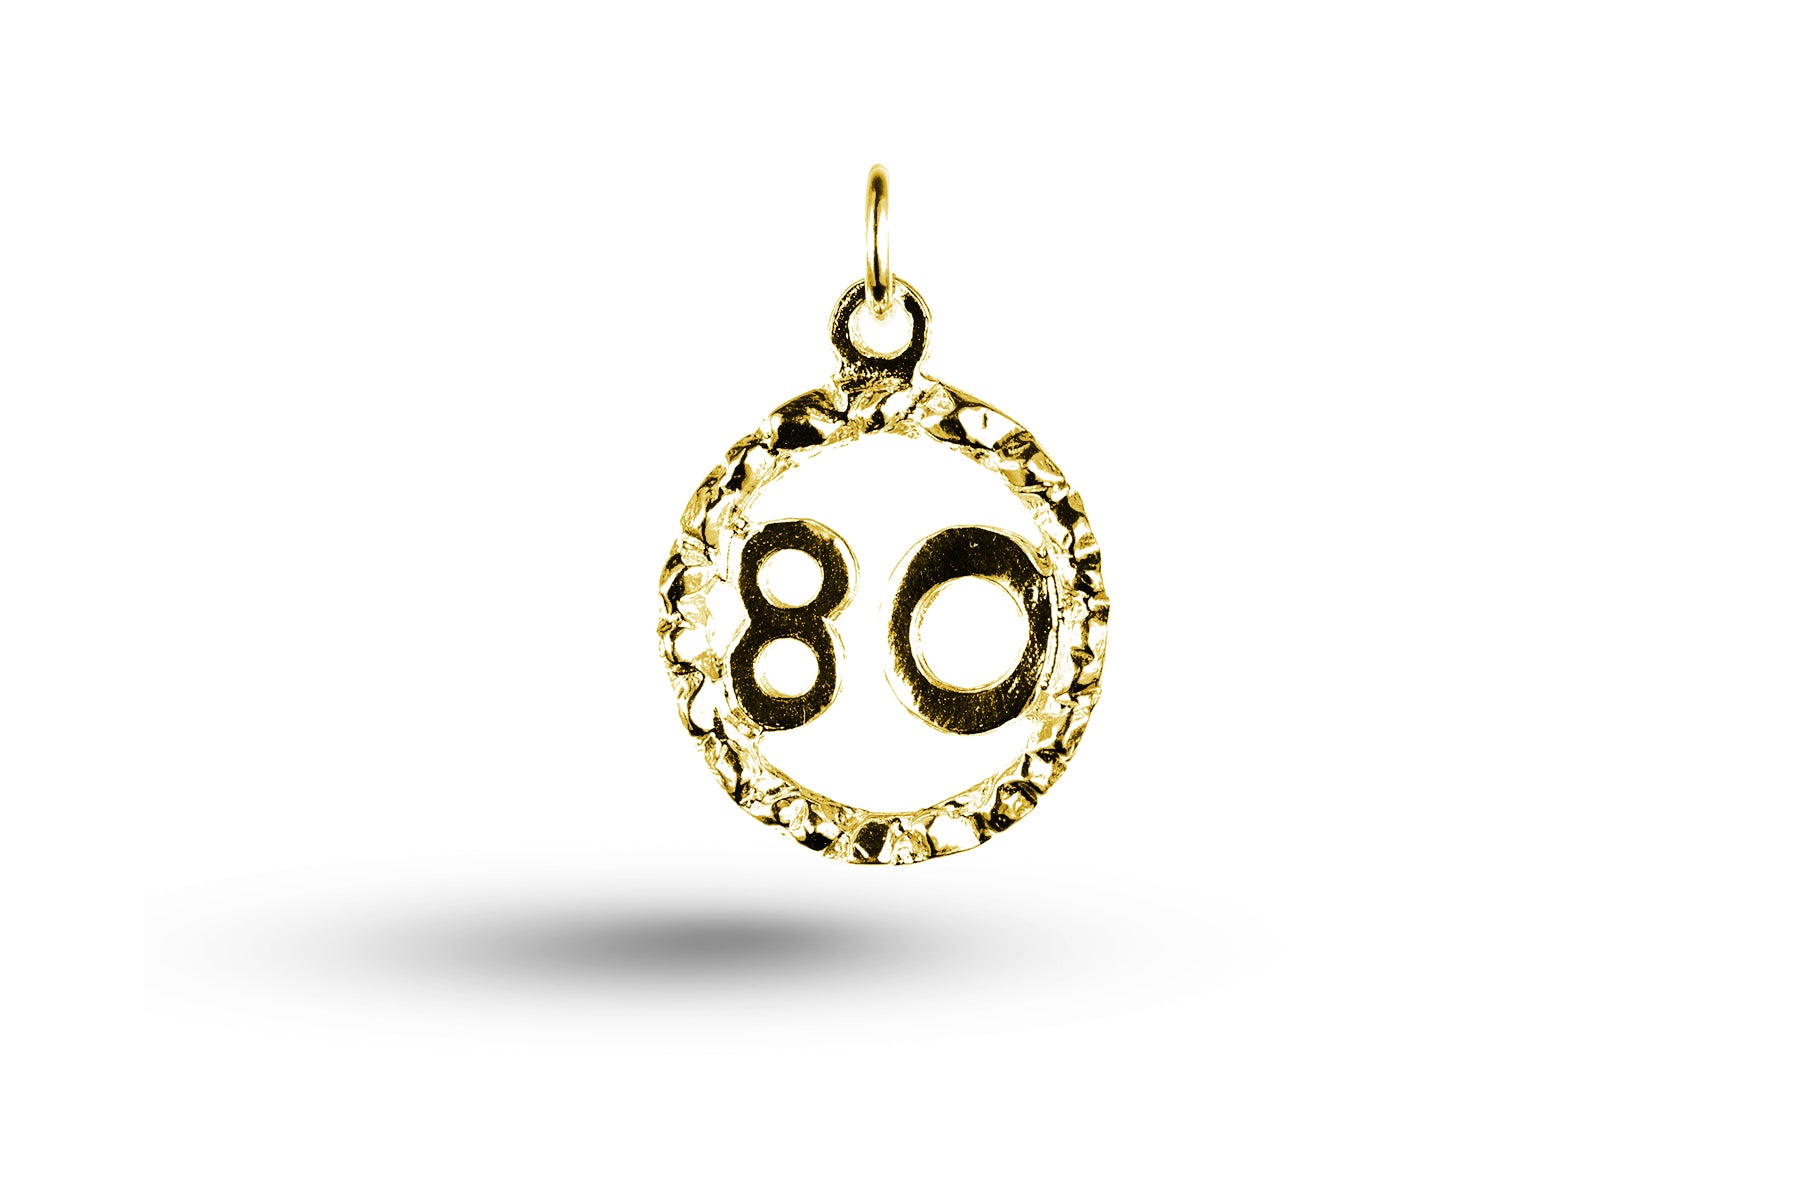 Yellow gold Eighty in Circle charm.